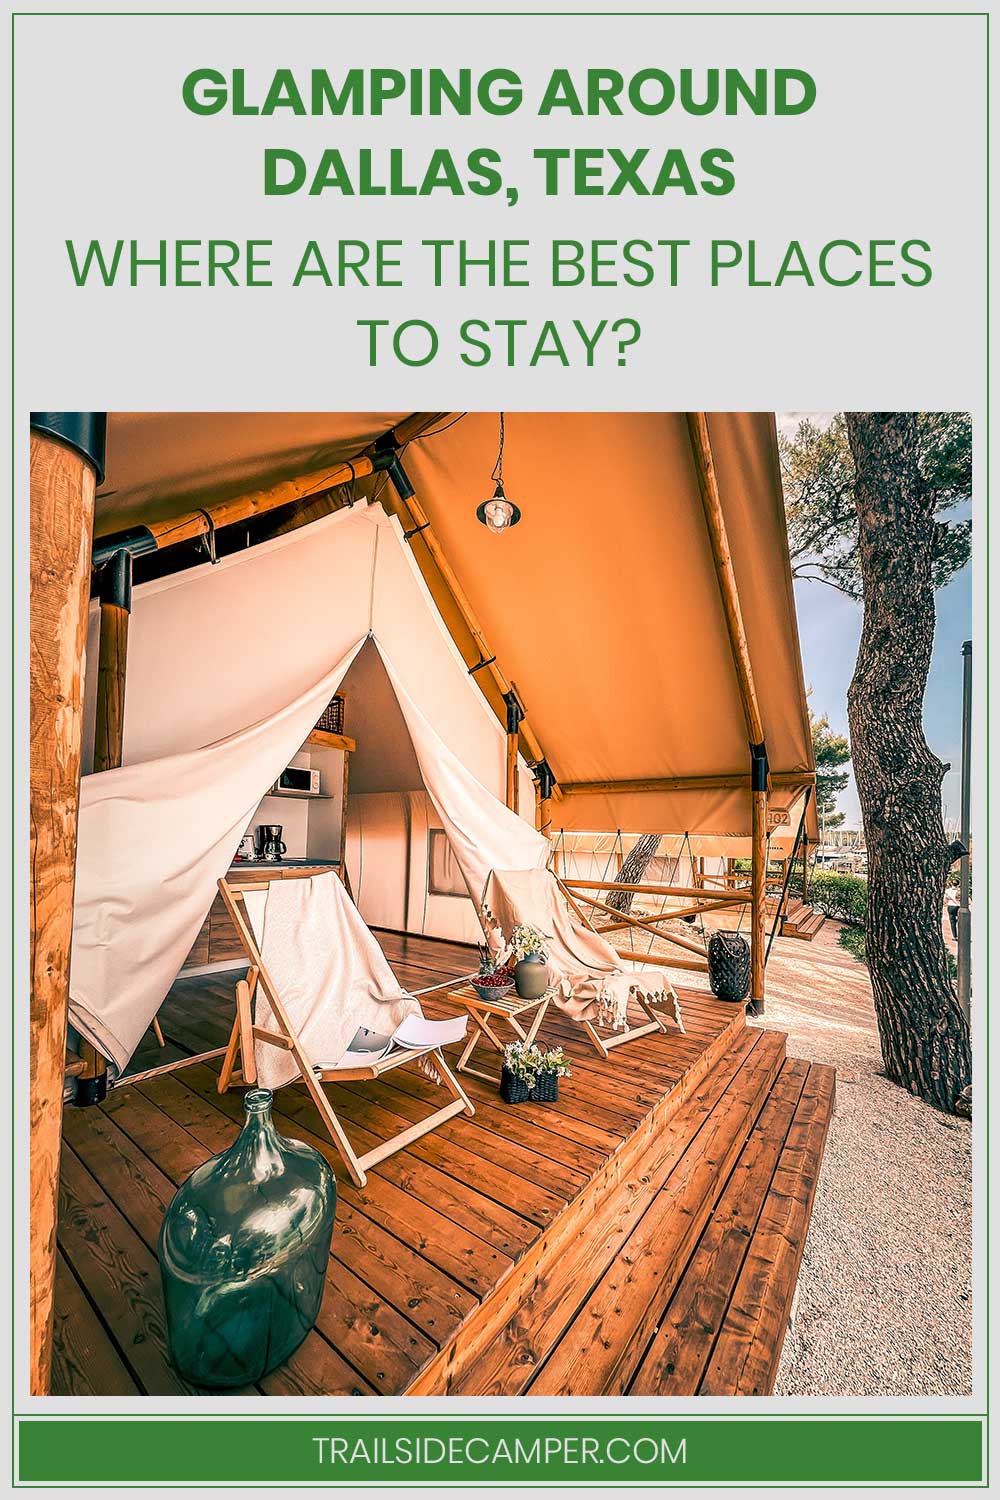 Glamping Around Dallas, Texas – Where are the Best Places To Stay?